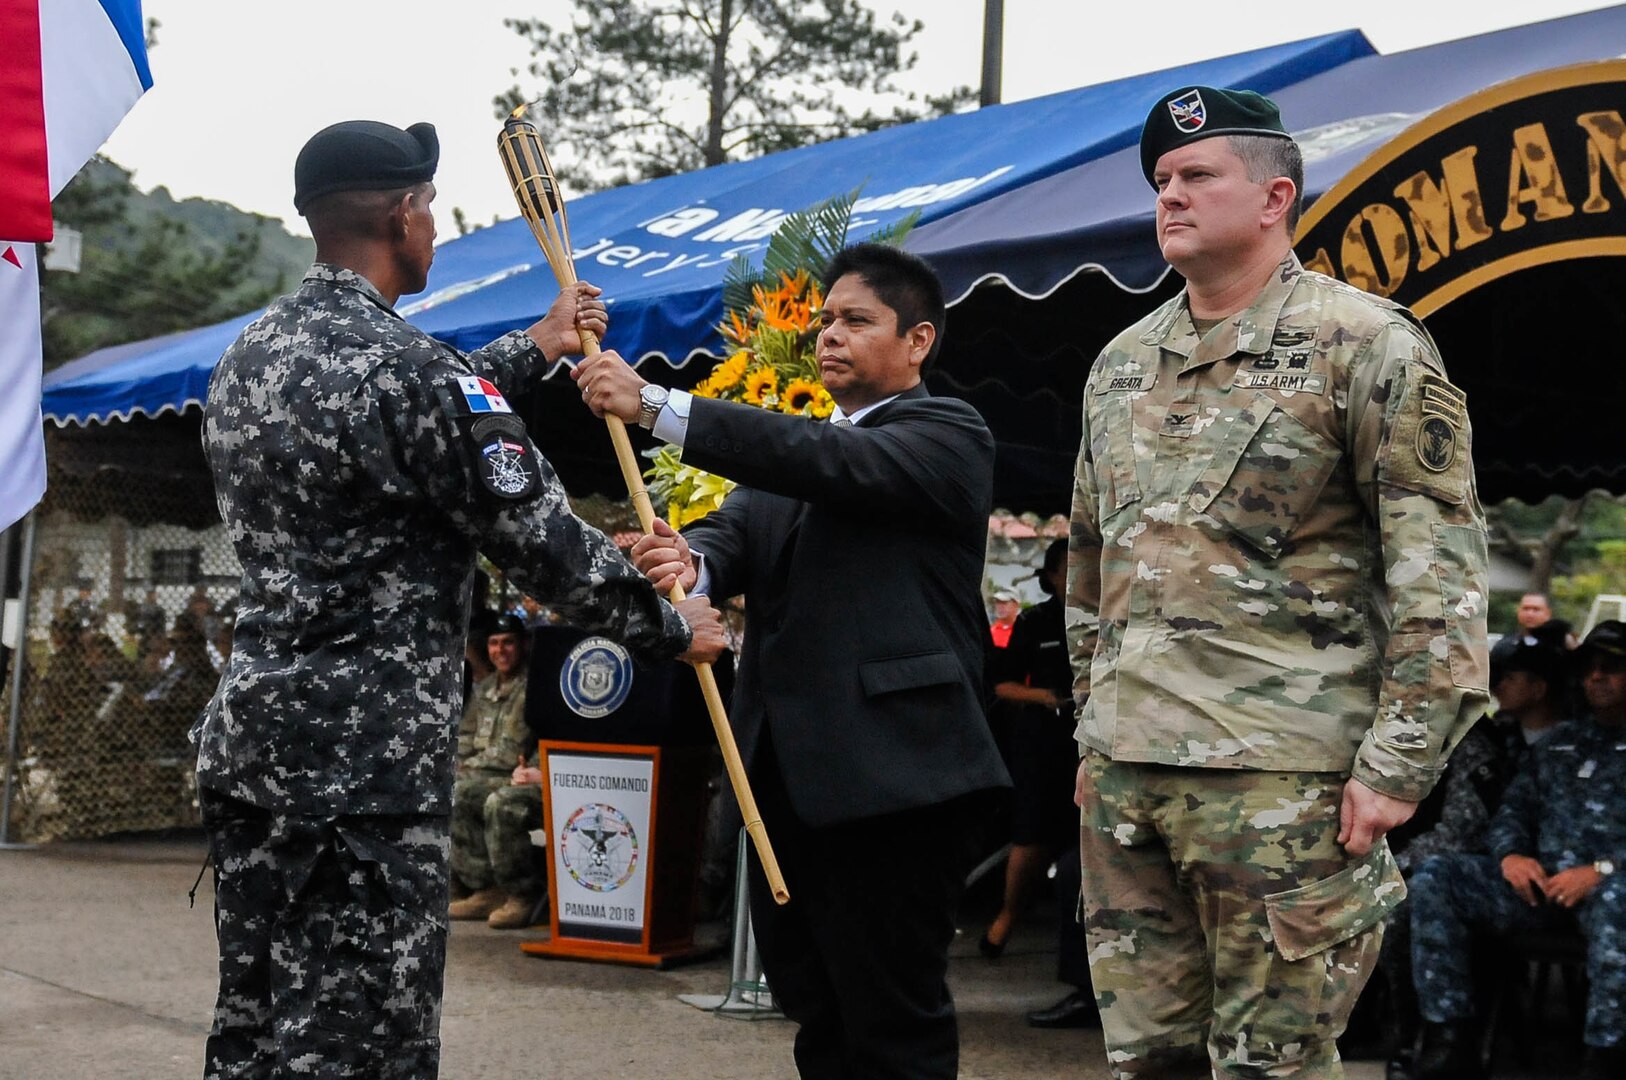 Minister Alexis Bethancourt Yau, minister of public security, and U.S. Army Col. Brian Greata, deputy commanding officer of Special Operations Command South accept a torch from the Panamanian Comandos.